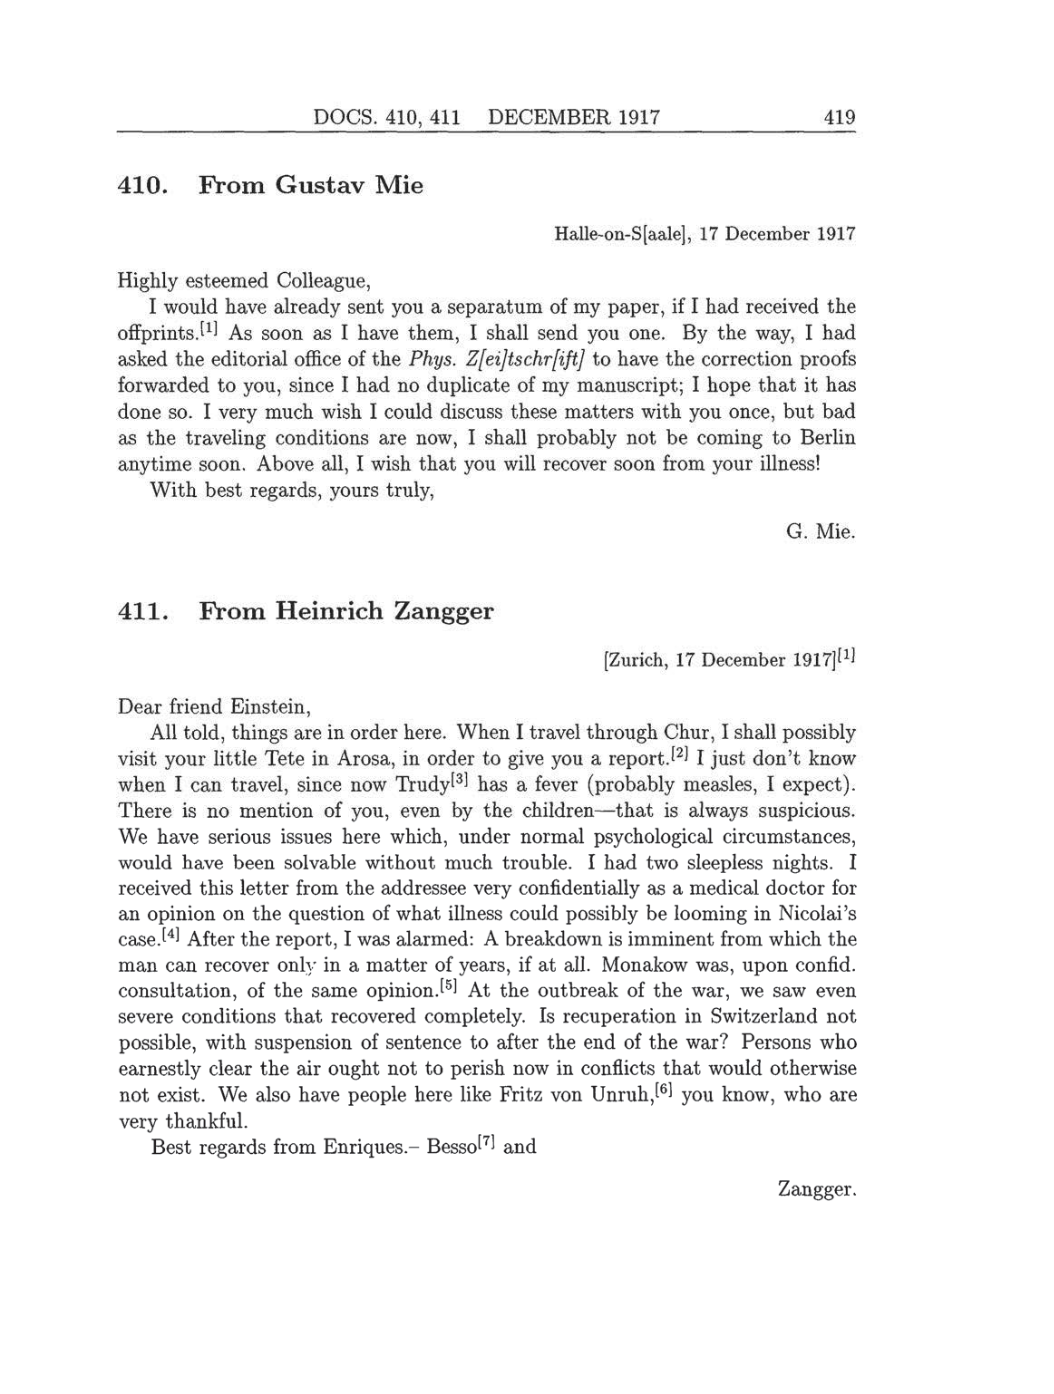 Volume 8: The Berlin Years: Correspondence, 1914-1918 (English translation supplement) page 419